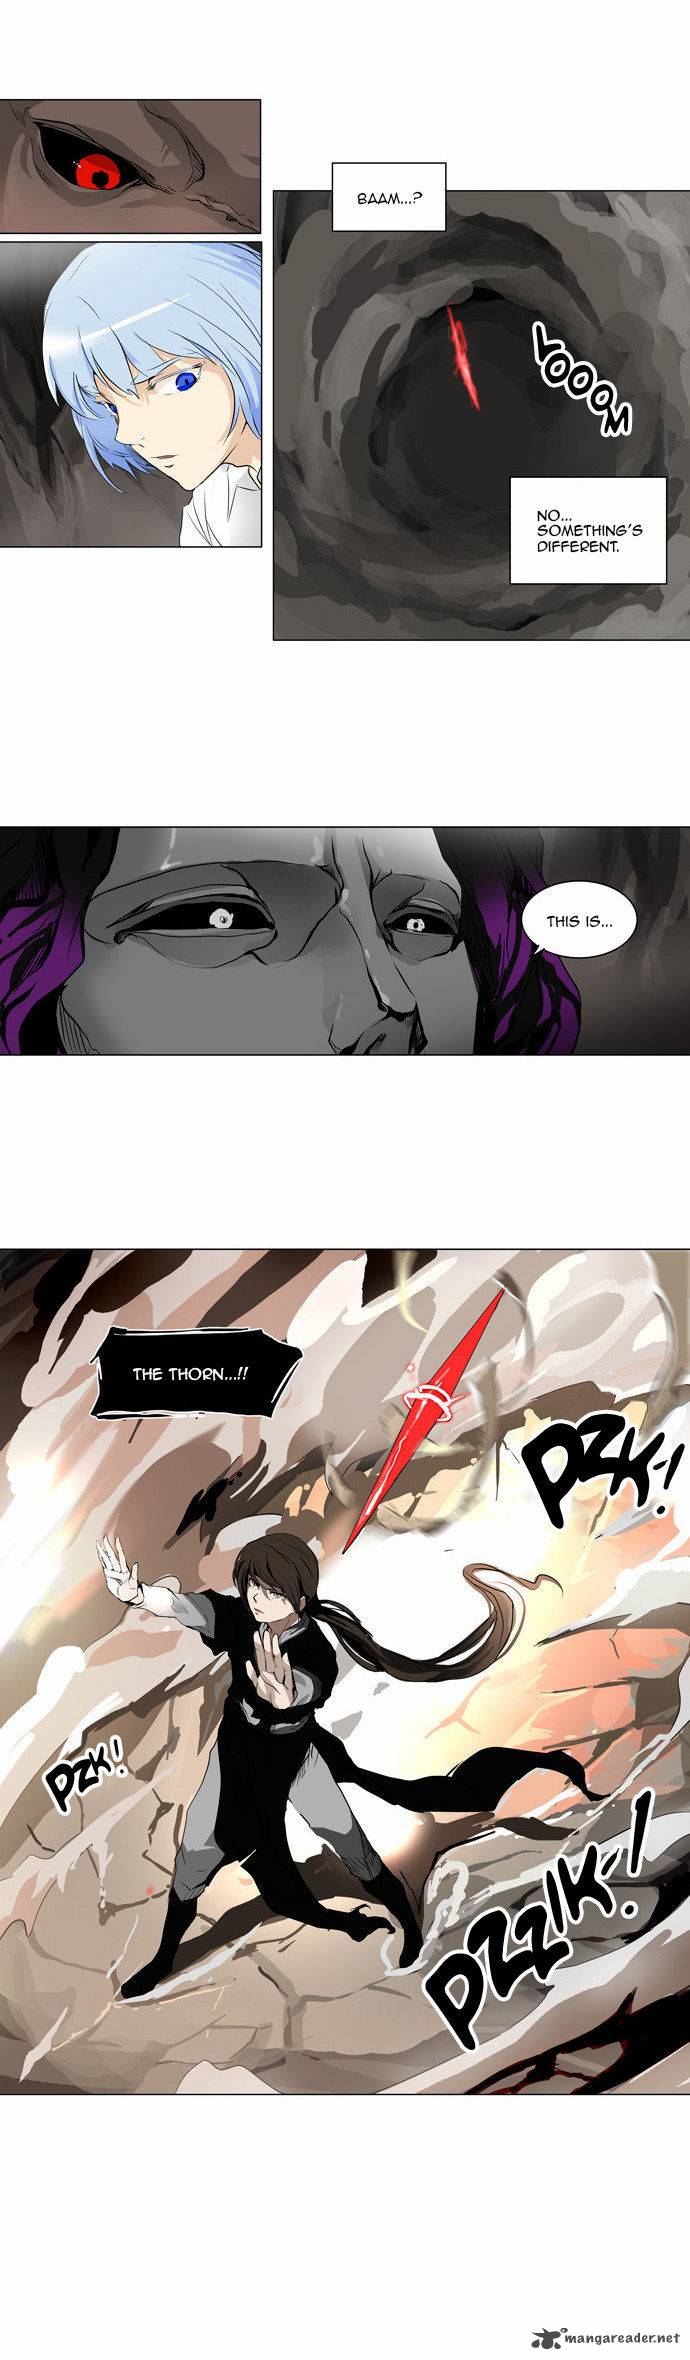 Tower Of God 103 19